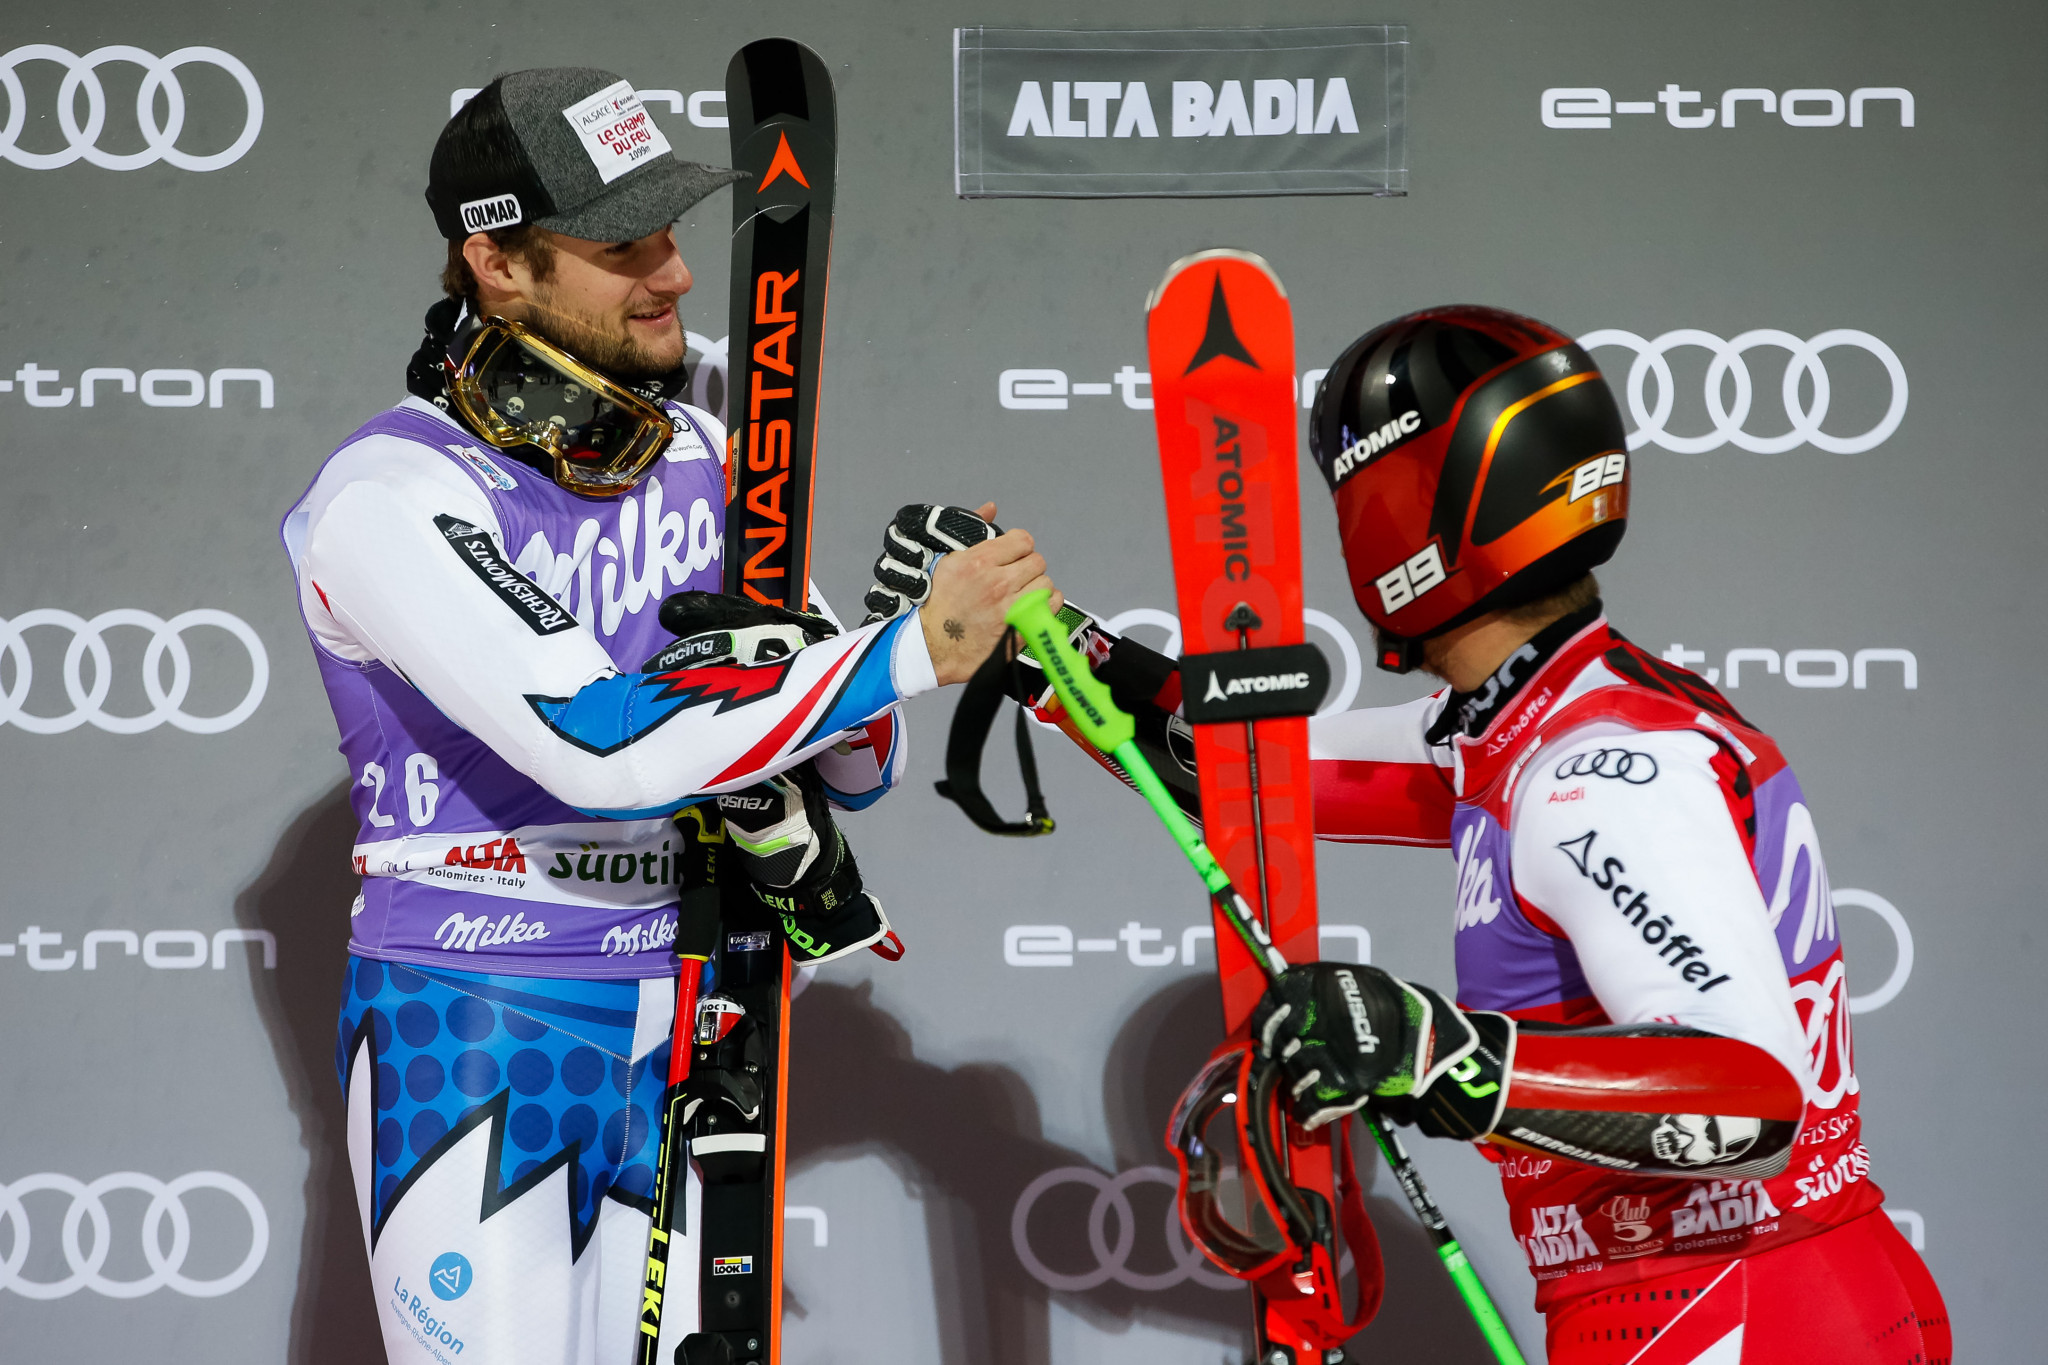 Thibaut Favrot of France was a surprise finalist  alongside Austria's Marcel Hirshcher in the parallel giant slalom event at the FIS Alpine Ski World Cup in Alta Badia ©Getty Images